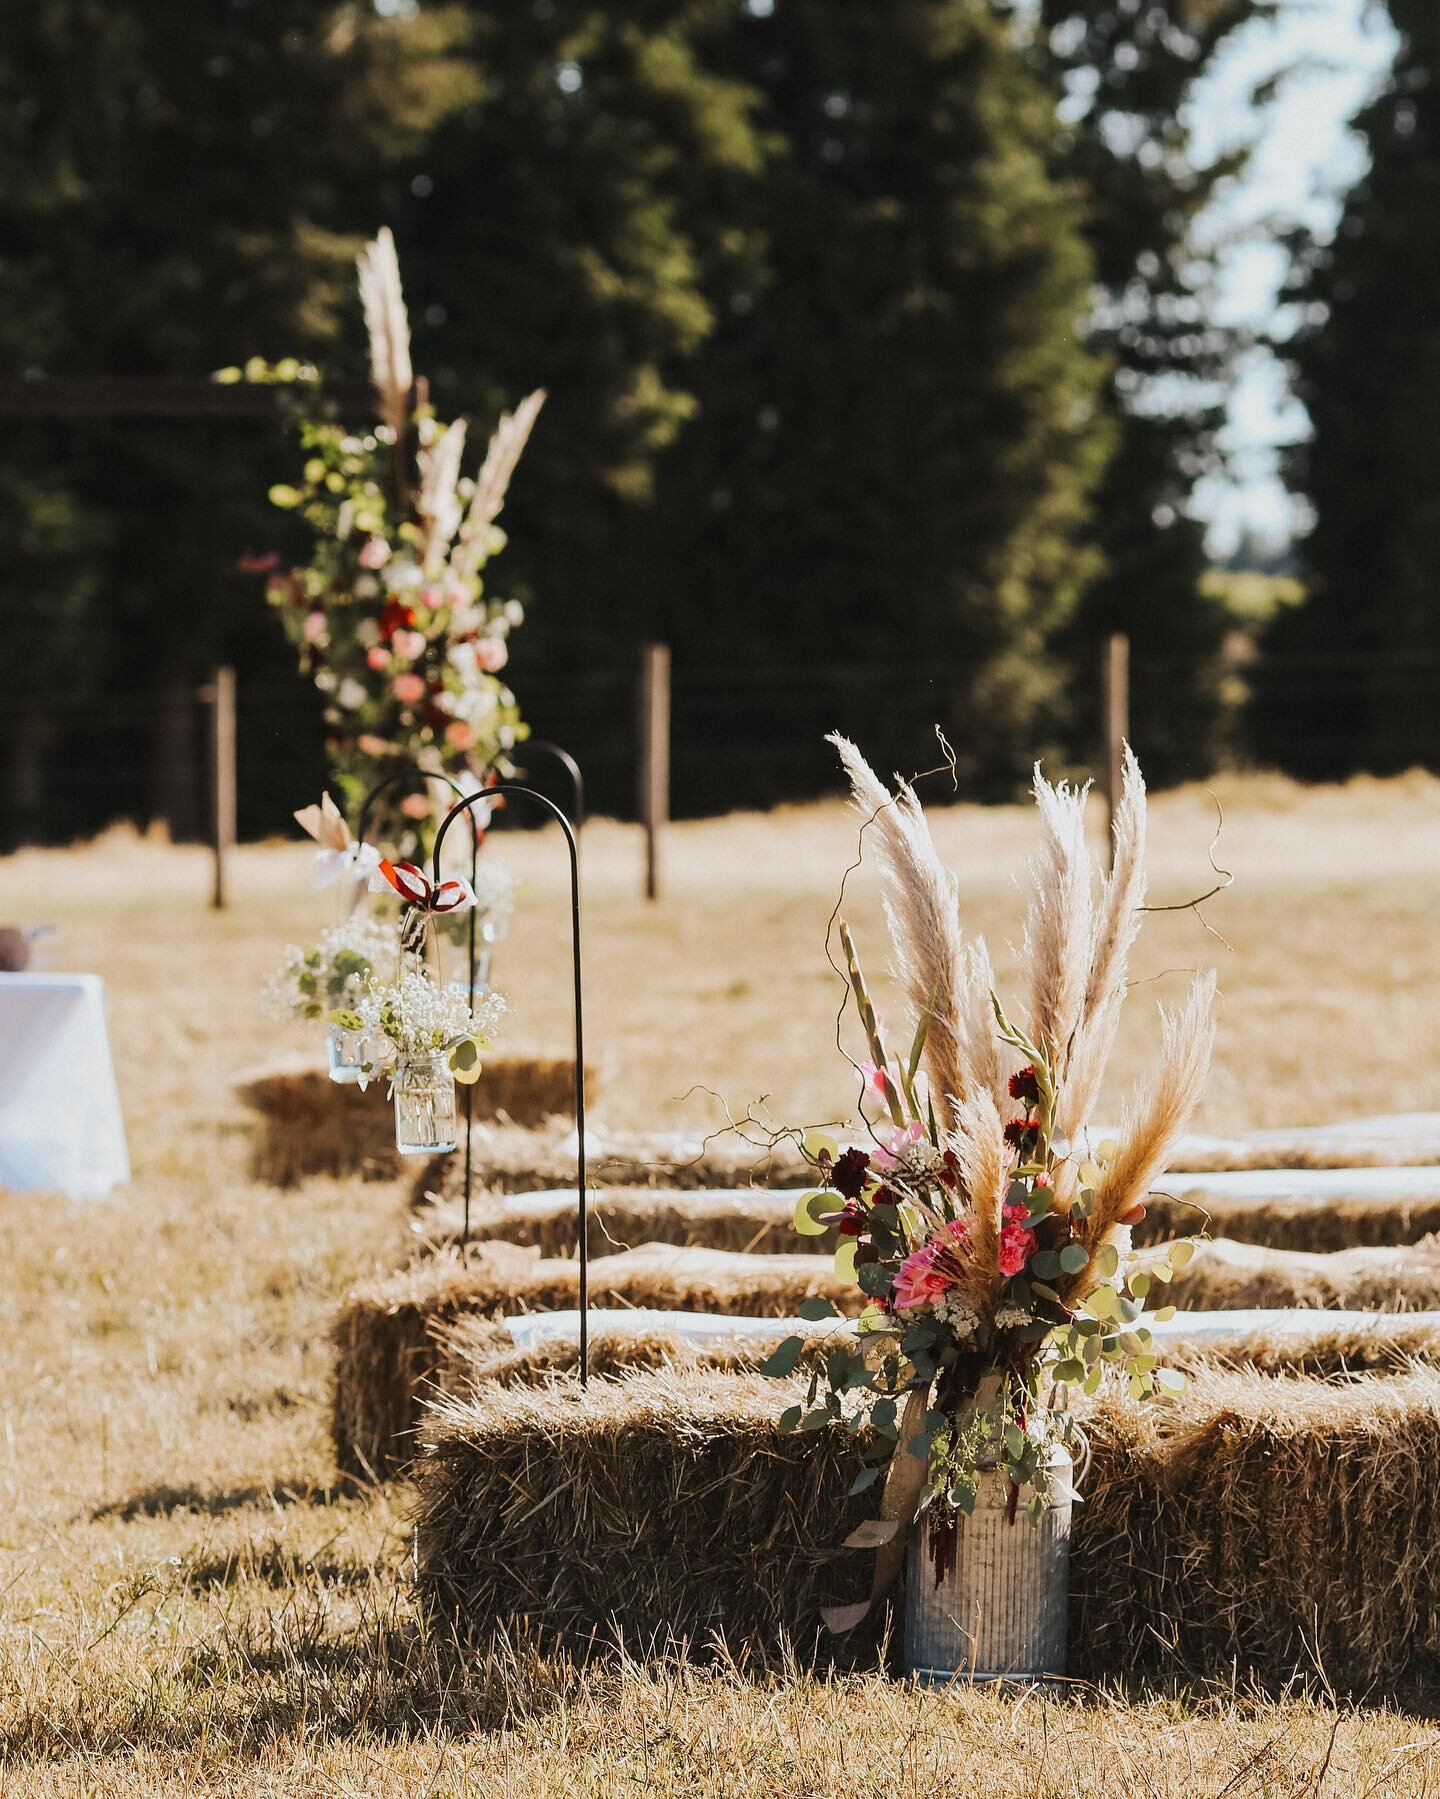 Give me ALL the pampas grass 😍😍😍
-
Seriously, if you want boho, it&rsquo;s the way to go! It is timeless + adds the finishing touch to any florals. I am absolutely obsessed with it!